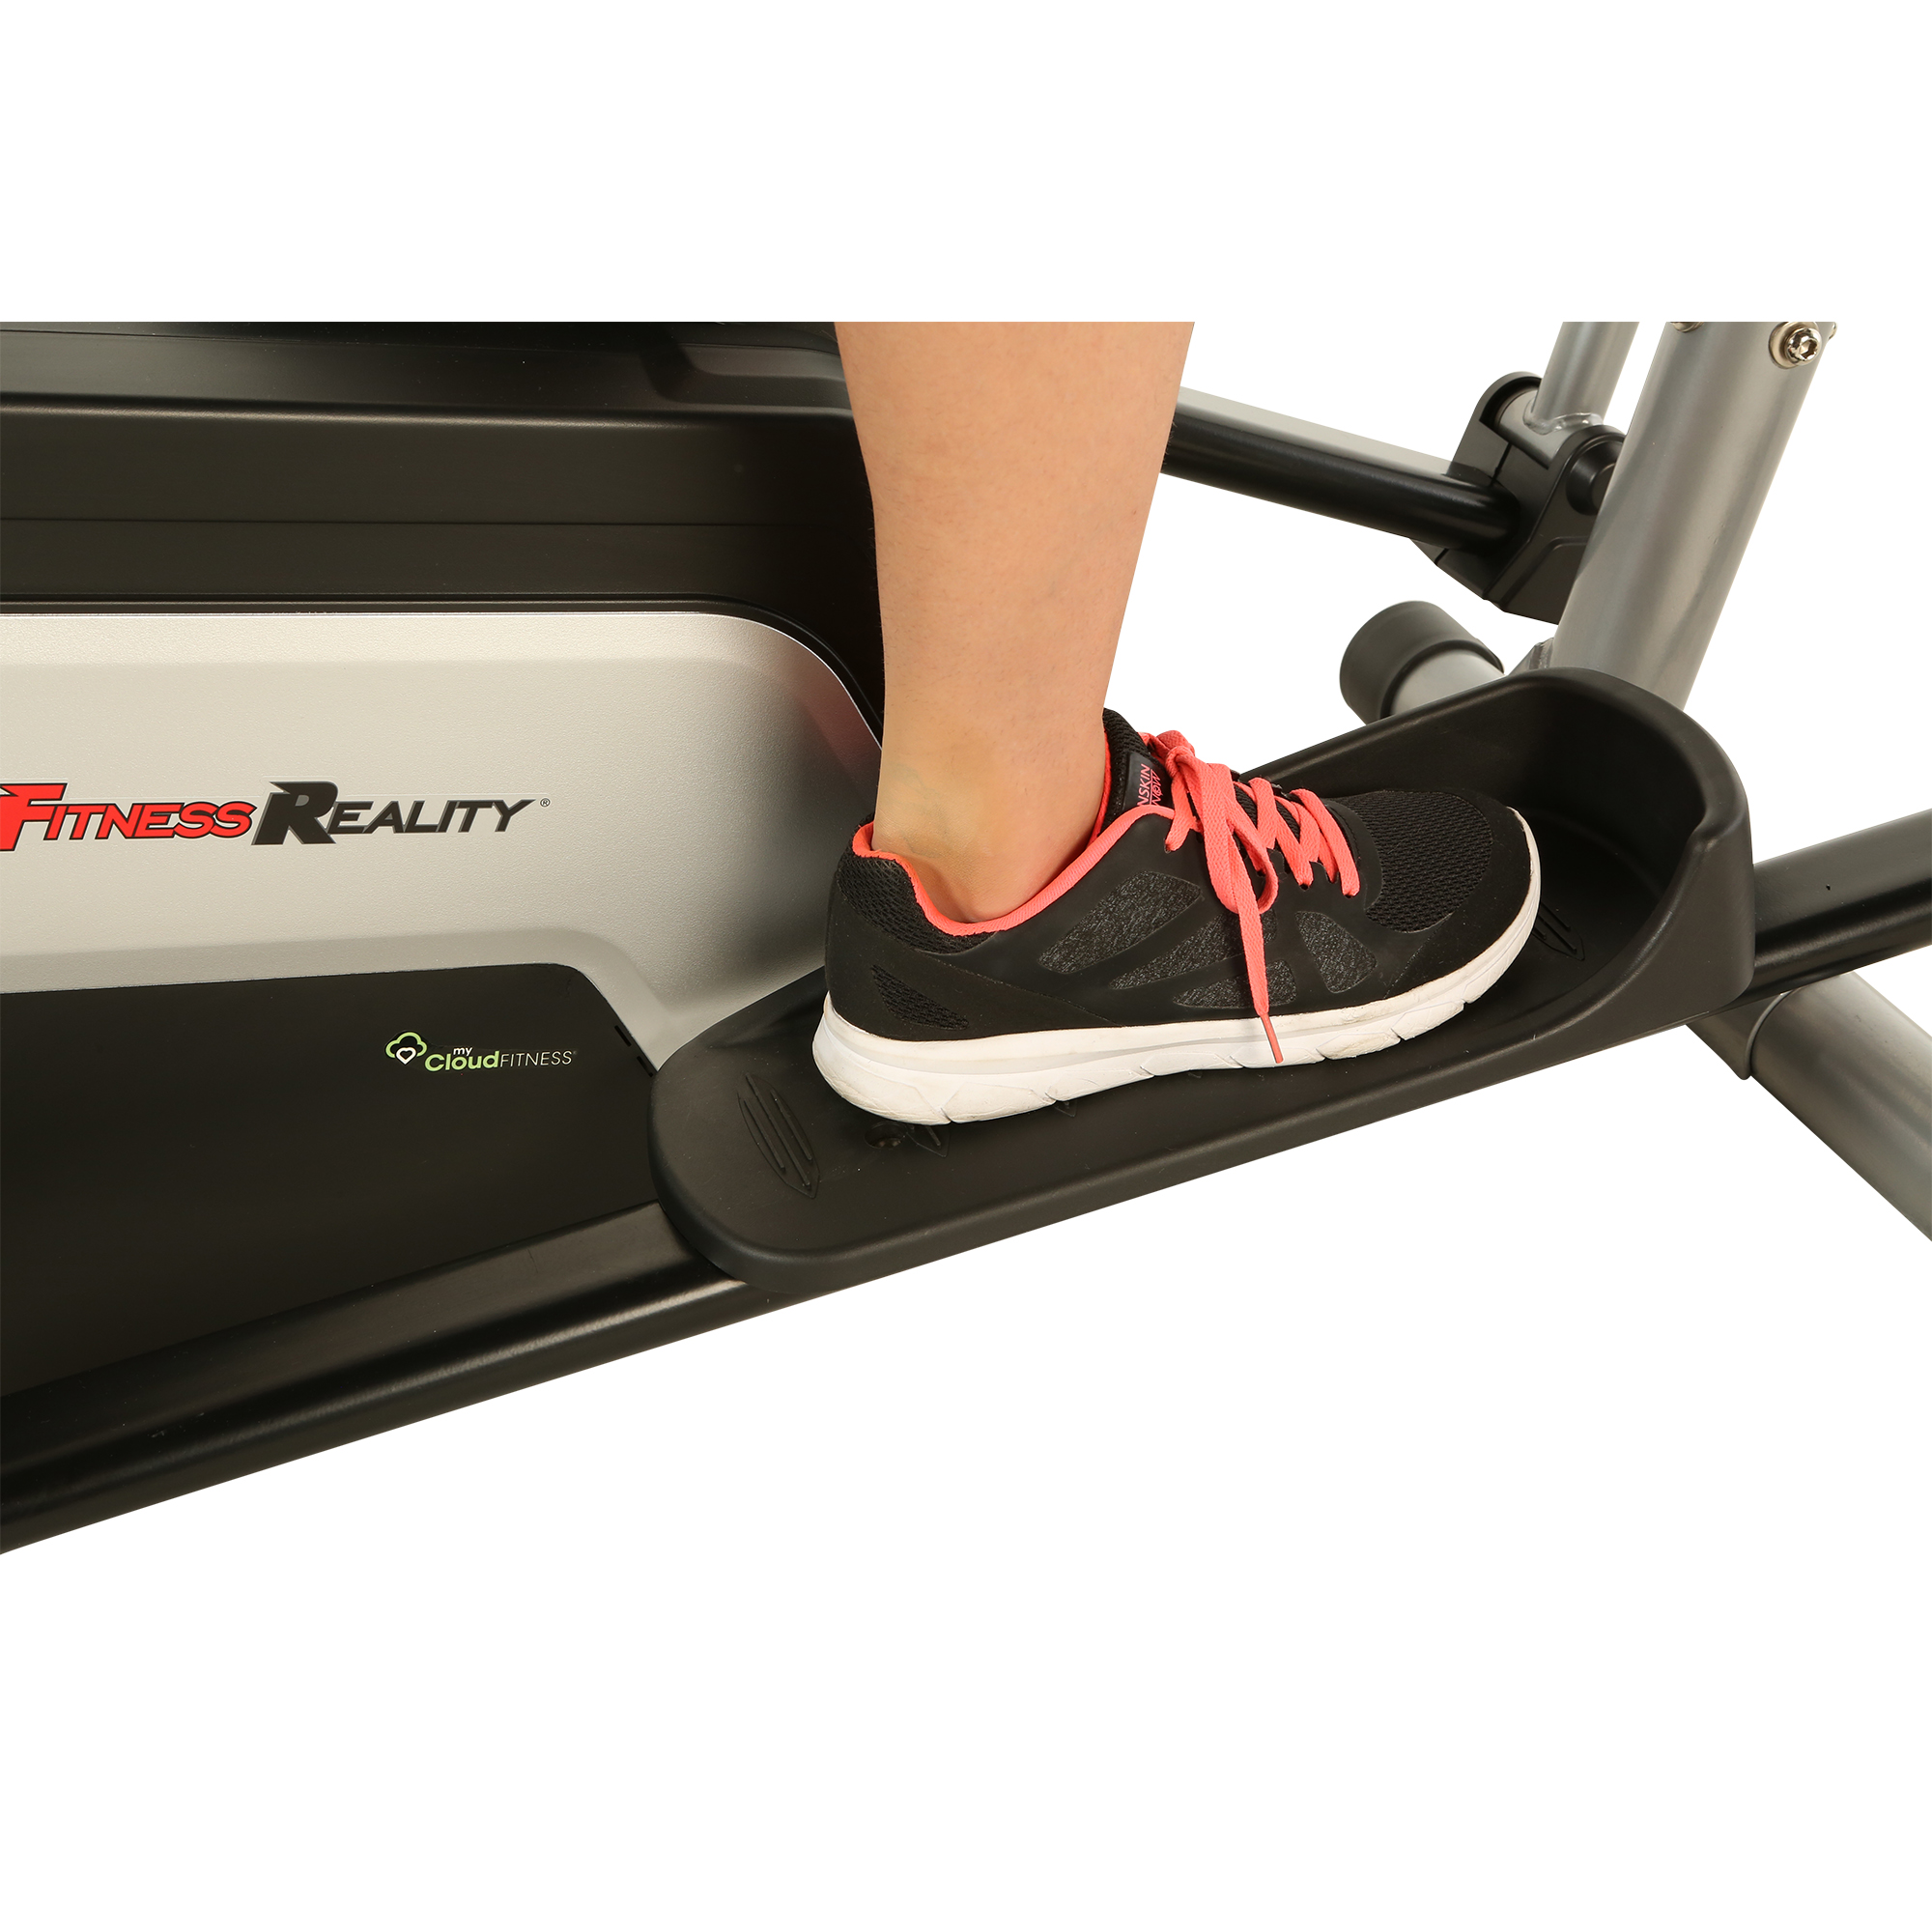 FITNESS REALITY Ei7500XL Bluetooth Magnetic Elliptical Trainer, 18” Stride, Goal Setting and Free App - image 4 of 20